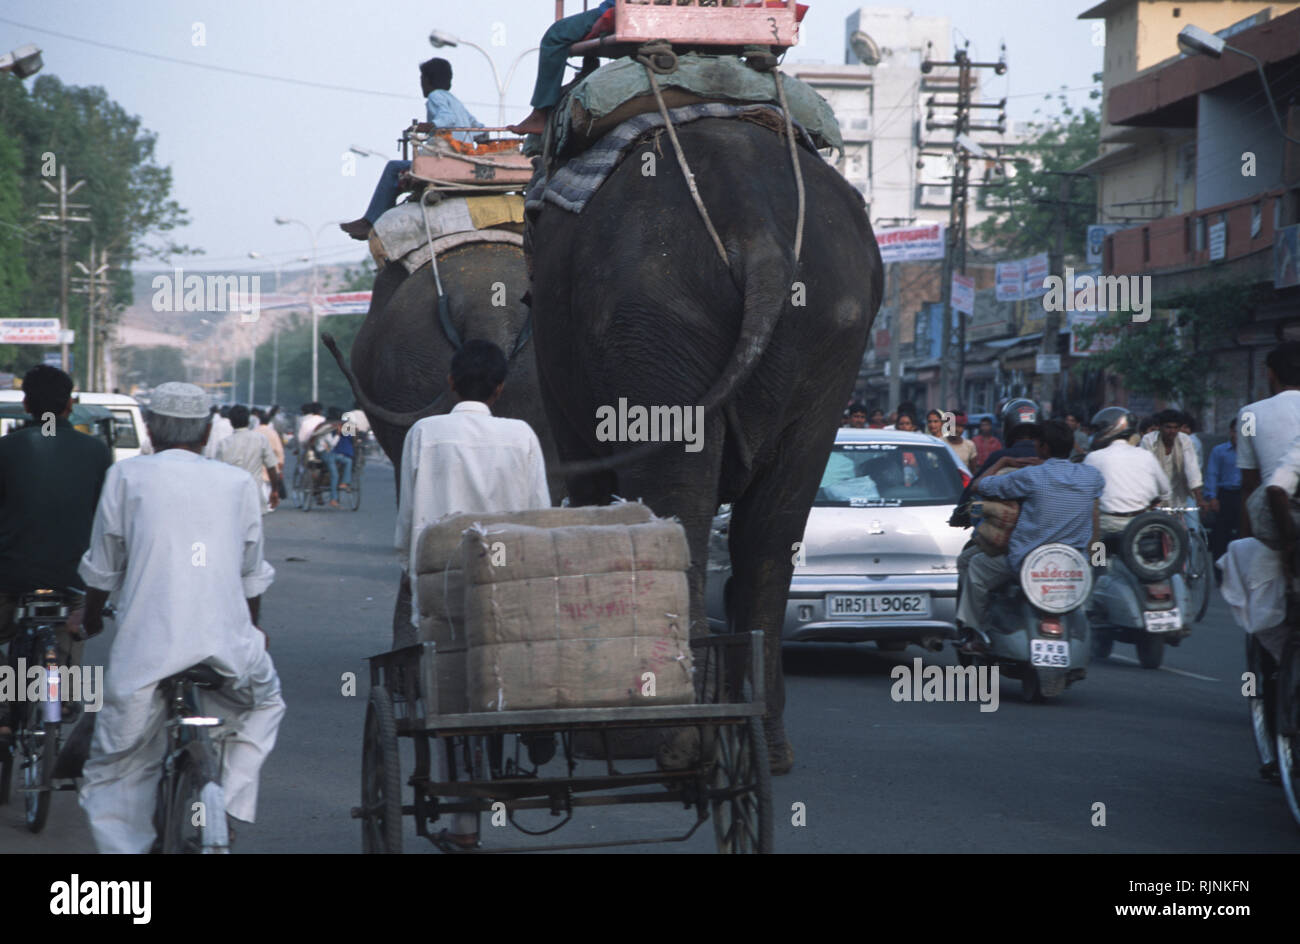 Caption: Jaipur, Rajasthan, India - Apr 2003. Elephants share the road with cars, motorbikes and bicycles in downtown Jaipur. An eclectic blend of con Stock Photo